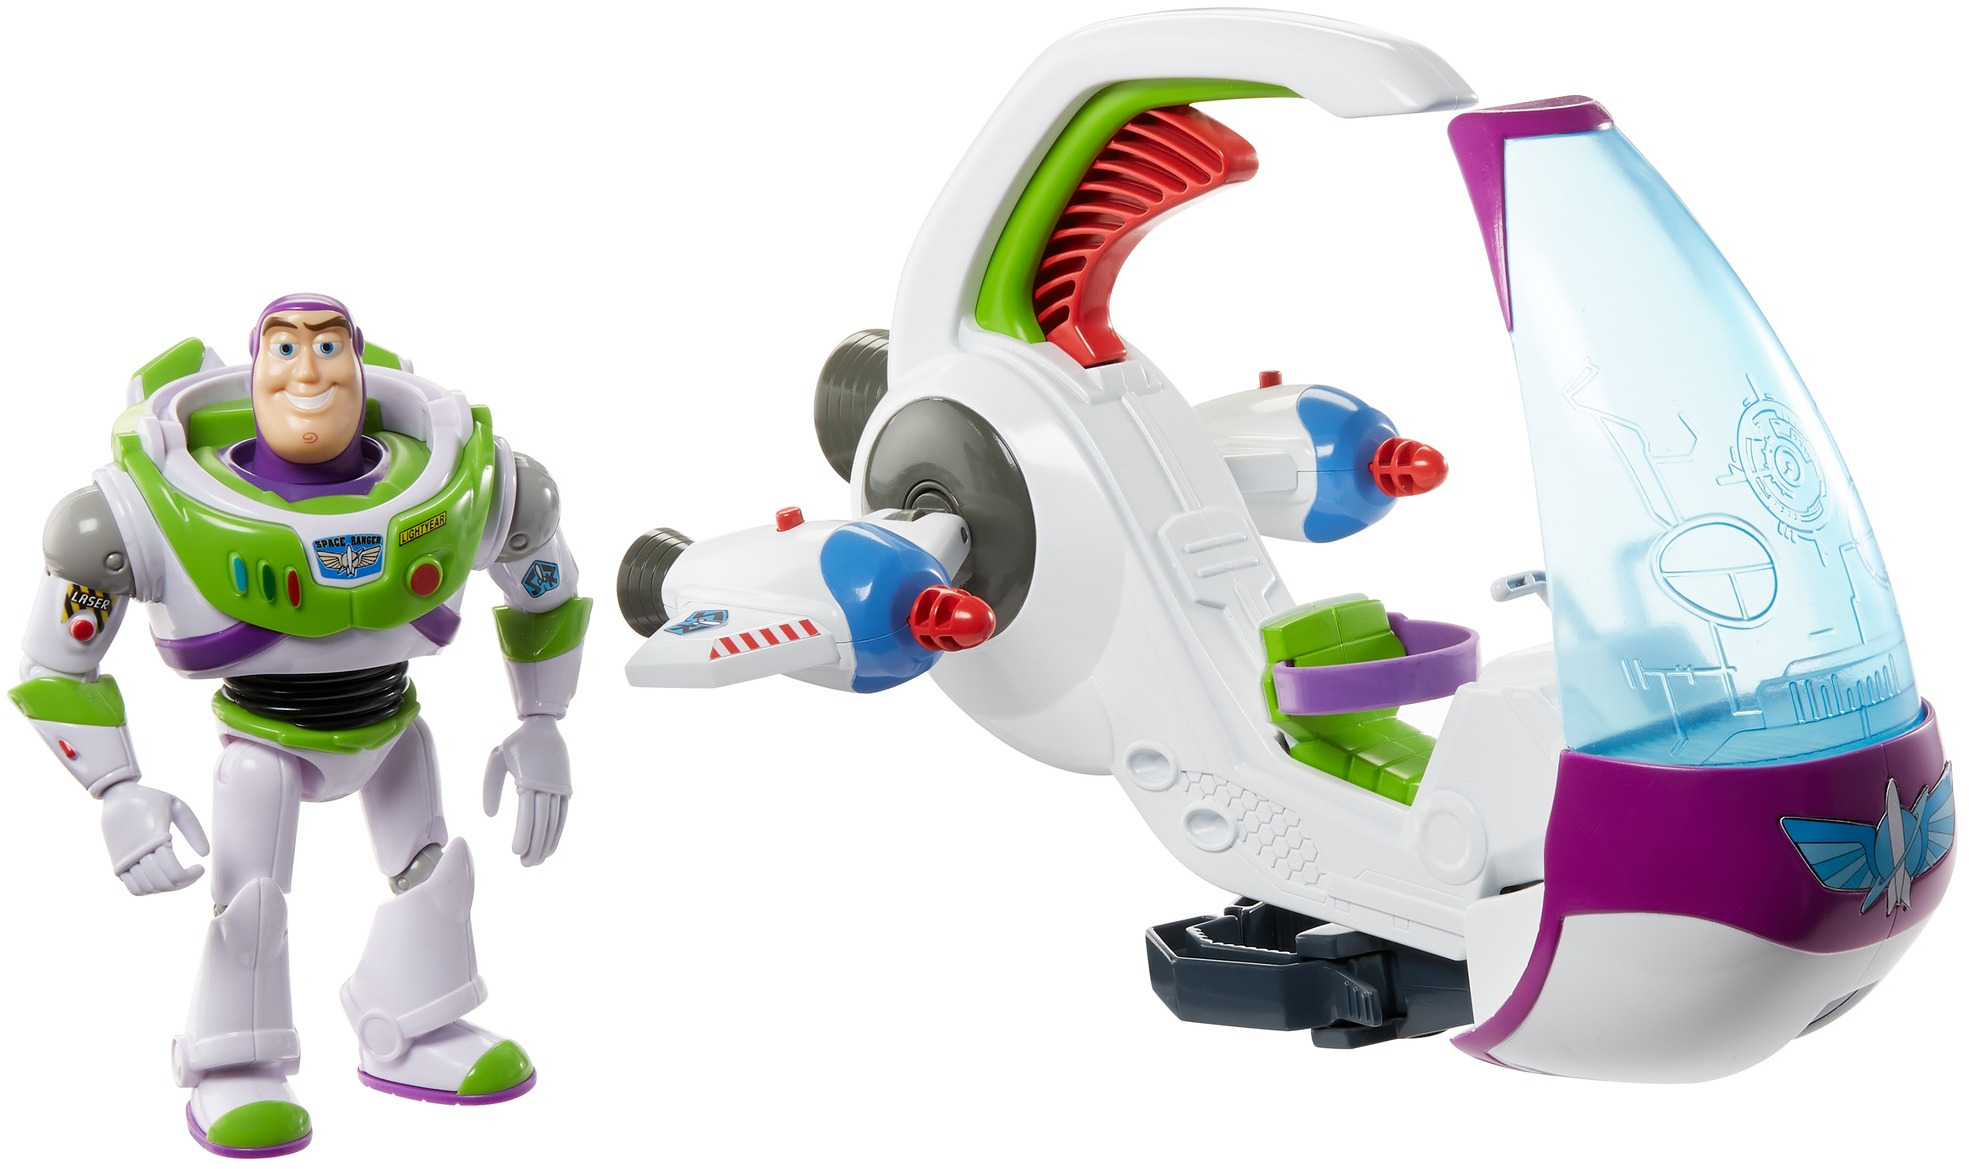 Disney Pixar Toy Story Galaxy Explorer Spacecraft Toy Vehicle For 4 Year Olds & Up - image 1 of 6